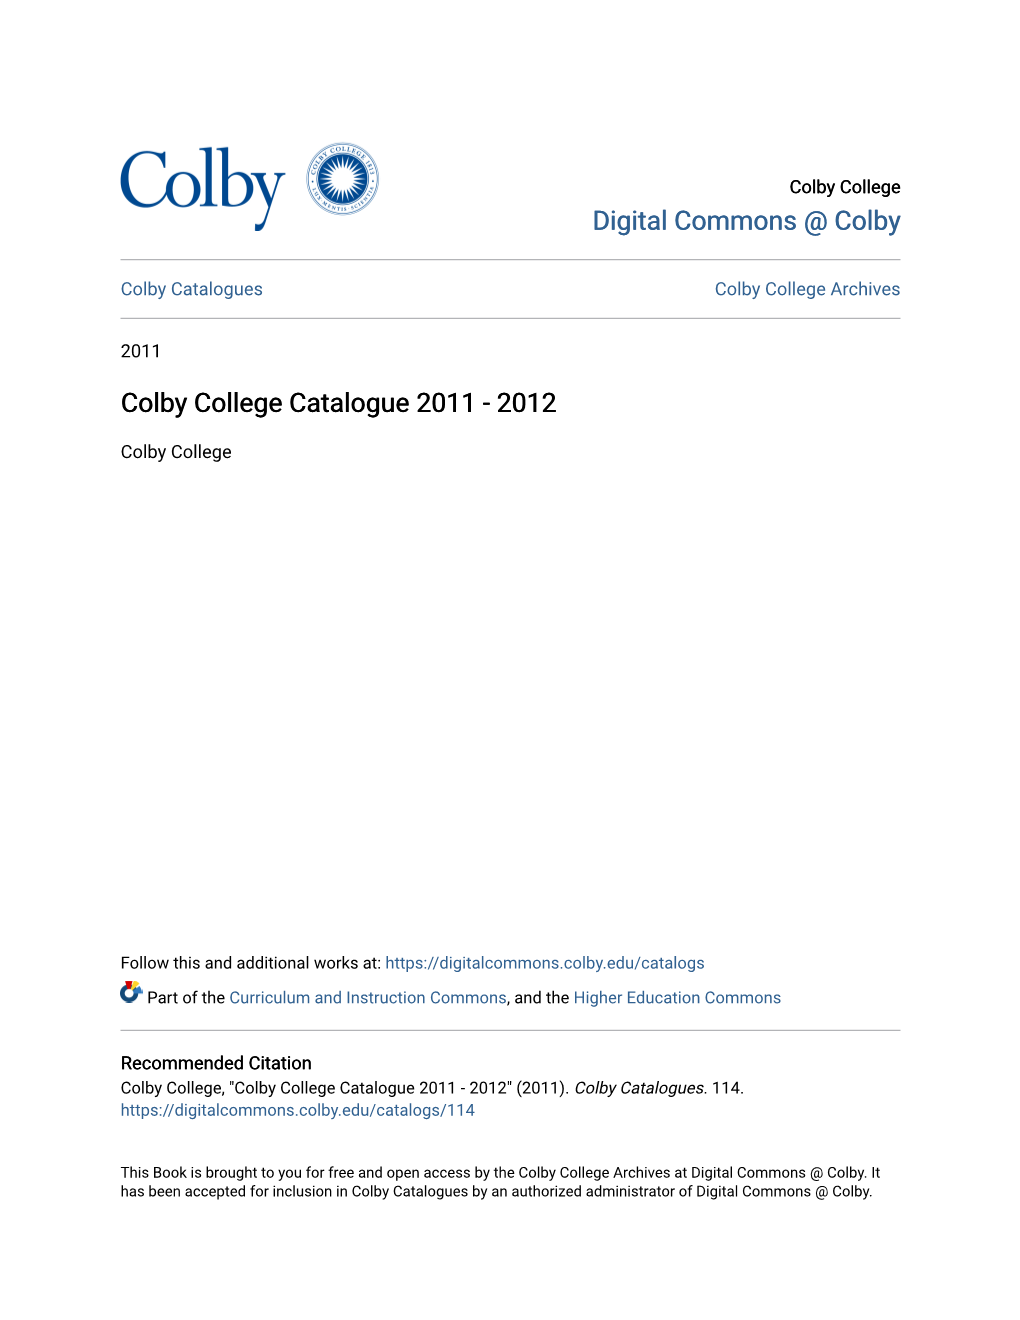 Colby College Catalogue 2011 - 2012